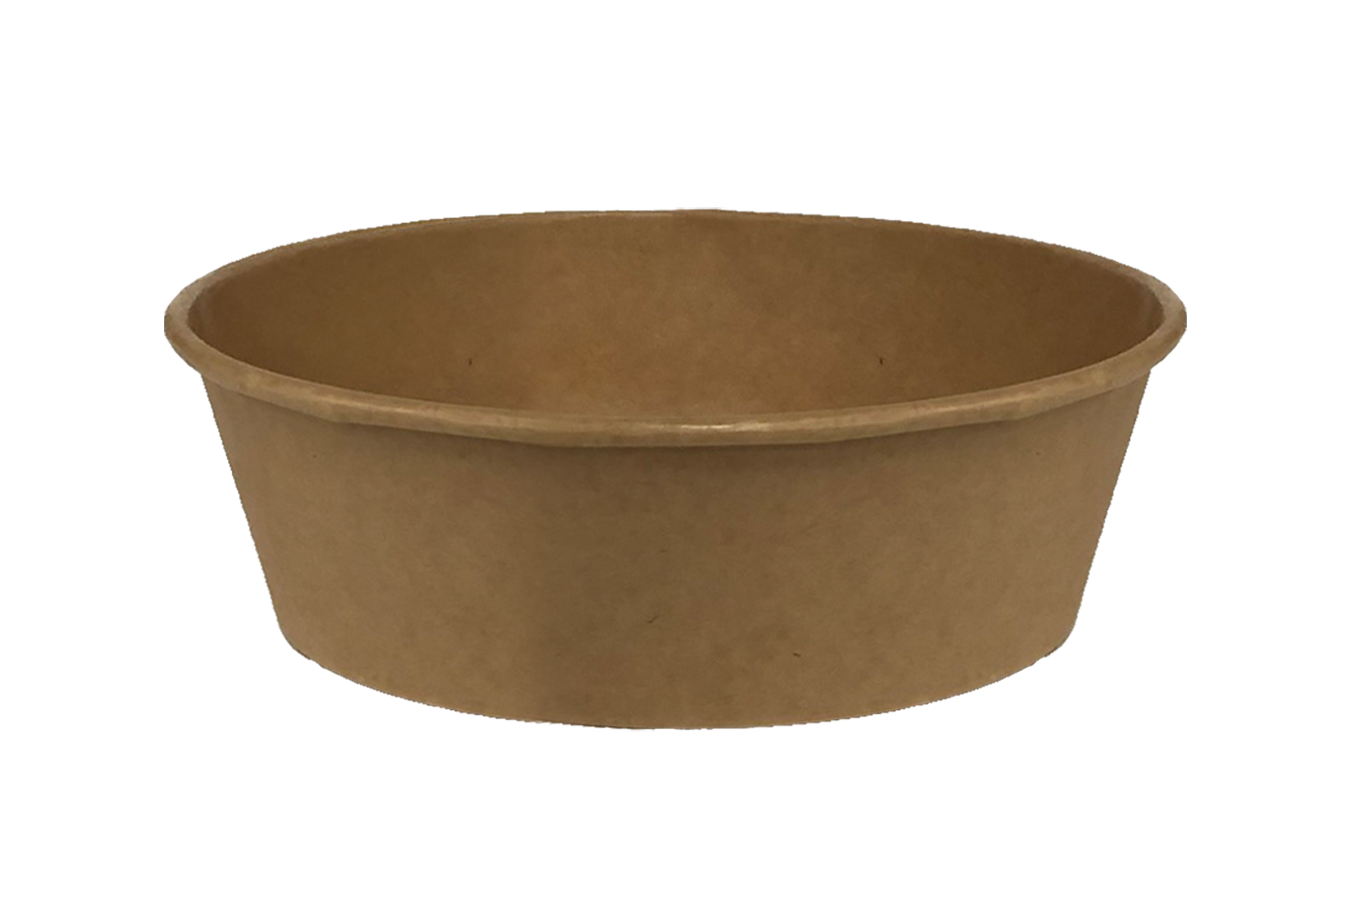 Premium takeout container Craft color 48 oz size Athena paper bowl by Ecoapx Inc